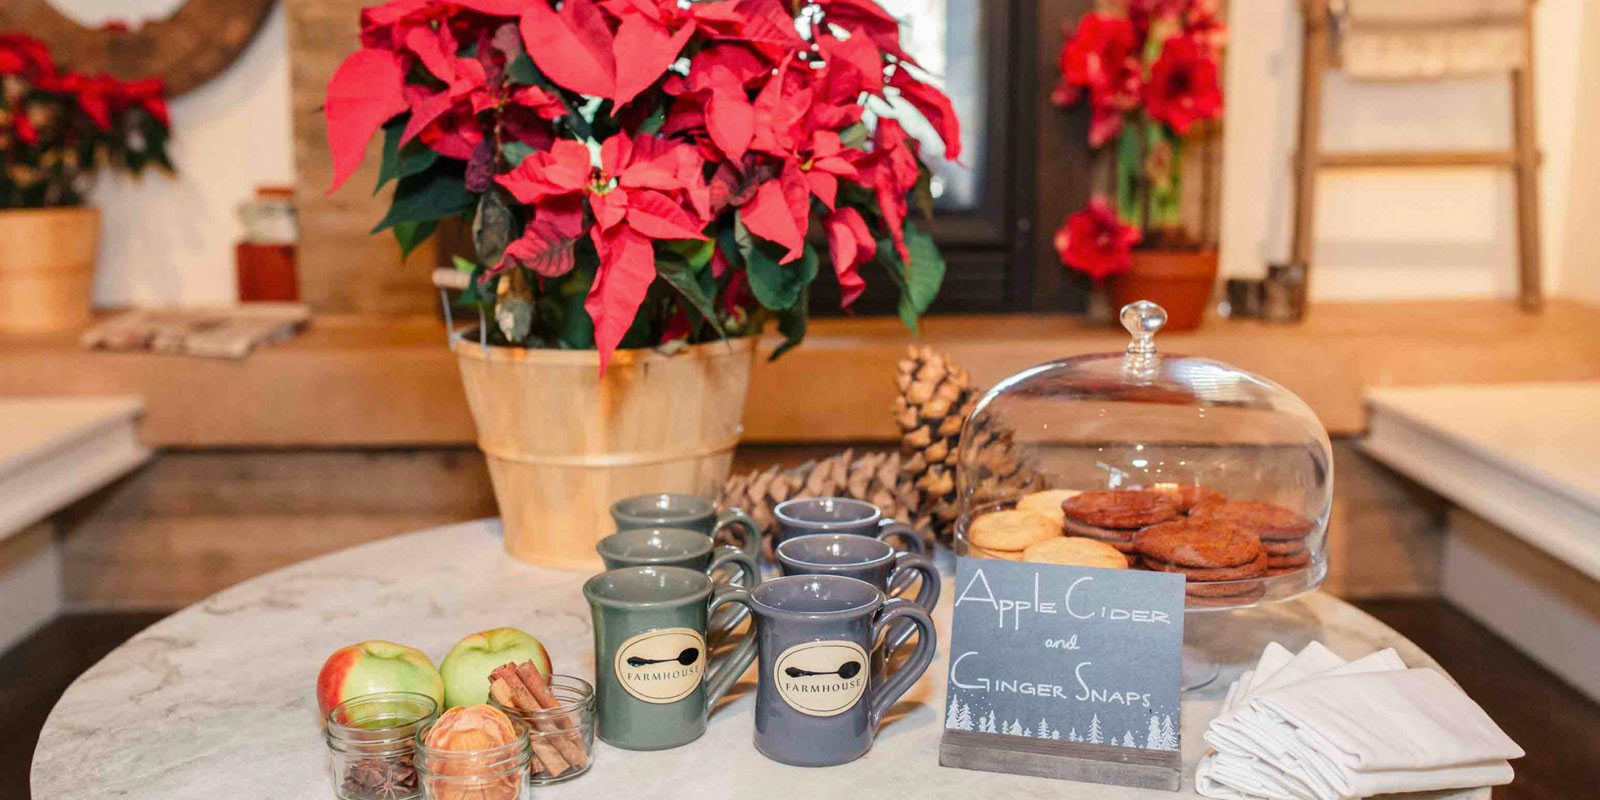 Table with potted red flowers, six gray coffee cups with Farmhouse logos, platter of cookies: apple cider and ginger snaps.